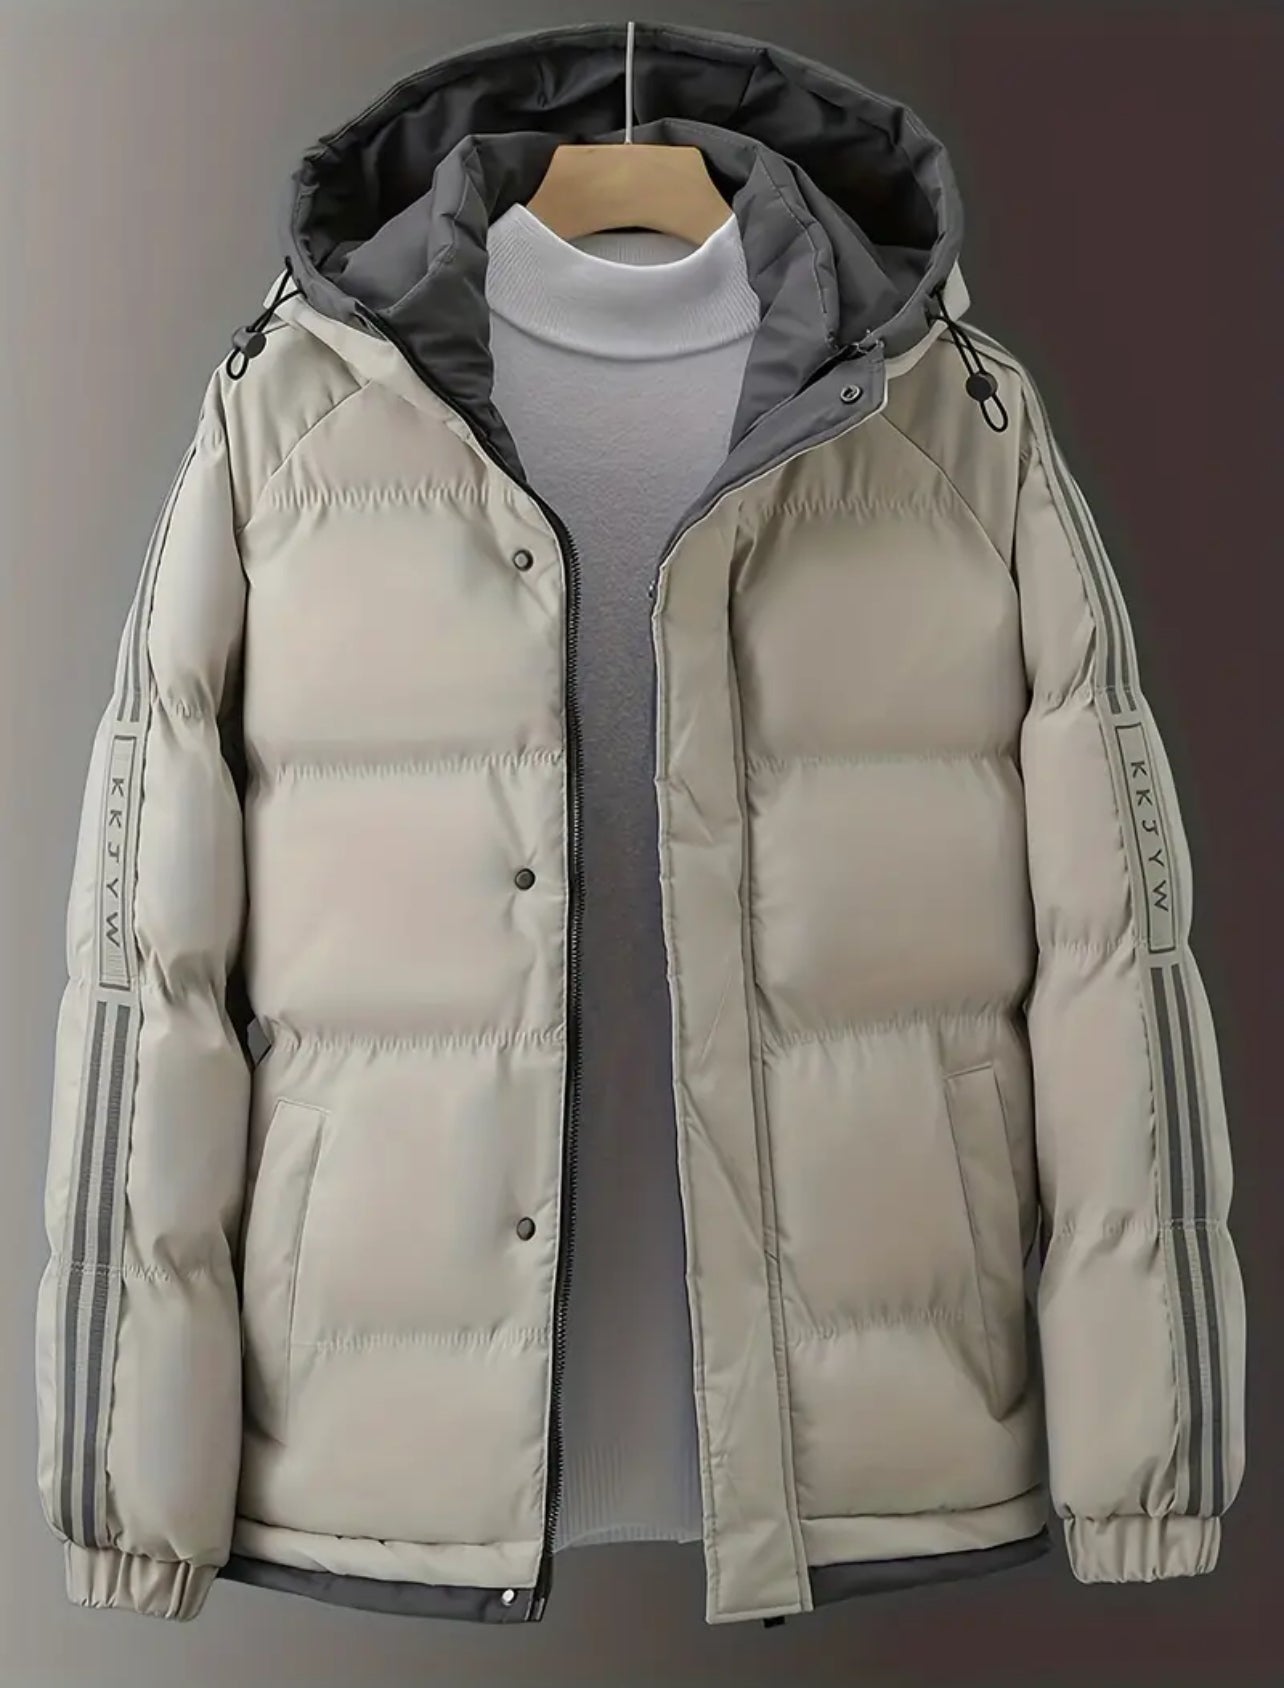 Classic Design Warm Hooded, Casual Zip Up Jacket